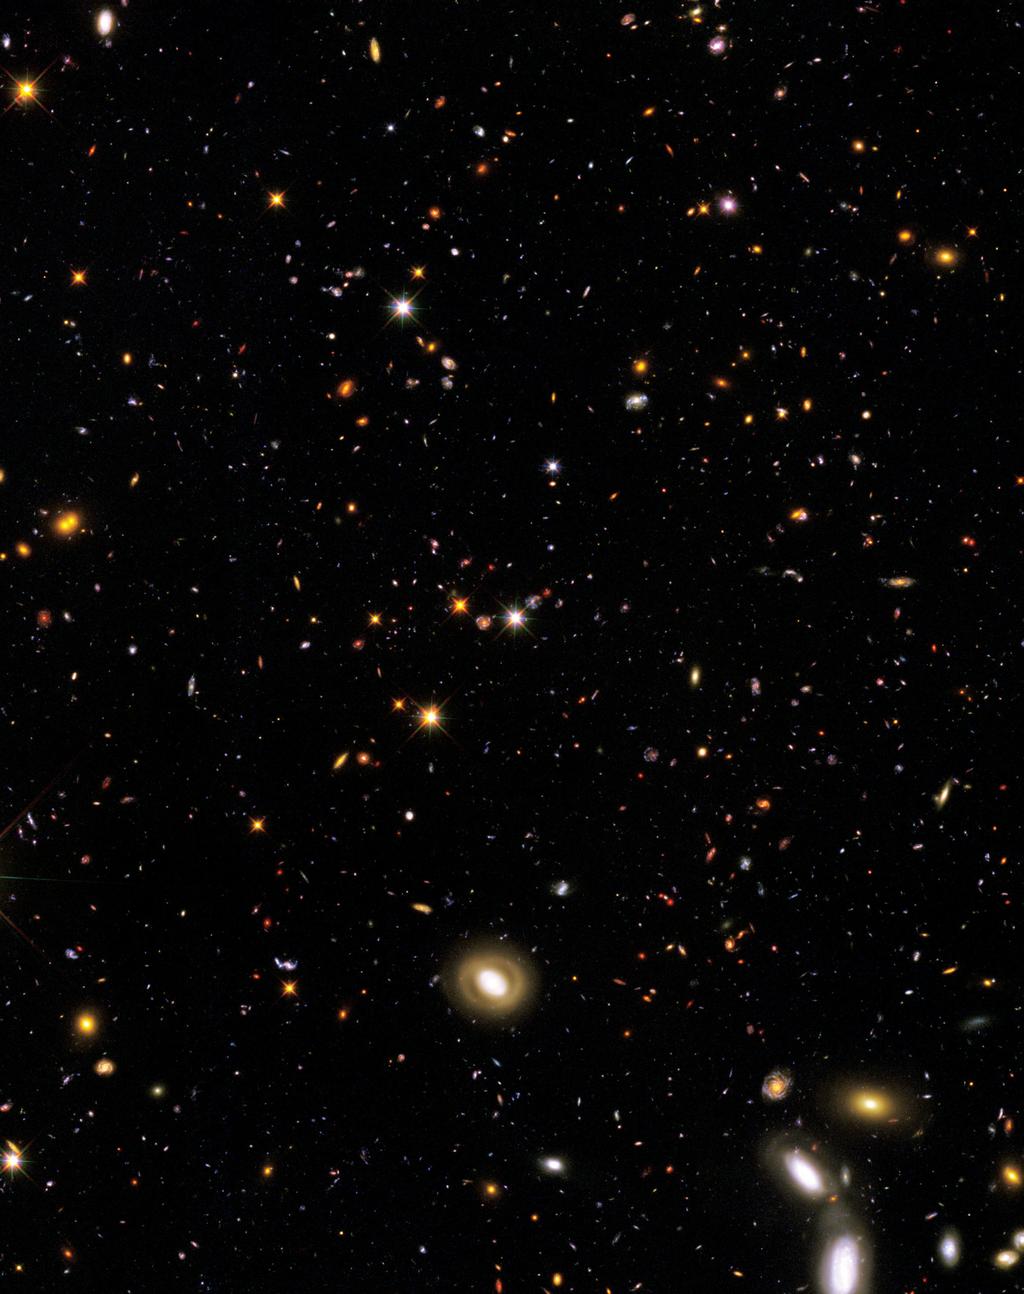 More than 12 billion years of cosmic history are shown in this panoramic view of thousands of galaxies in various stages of development.